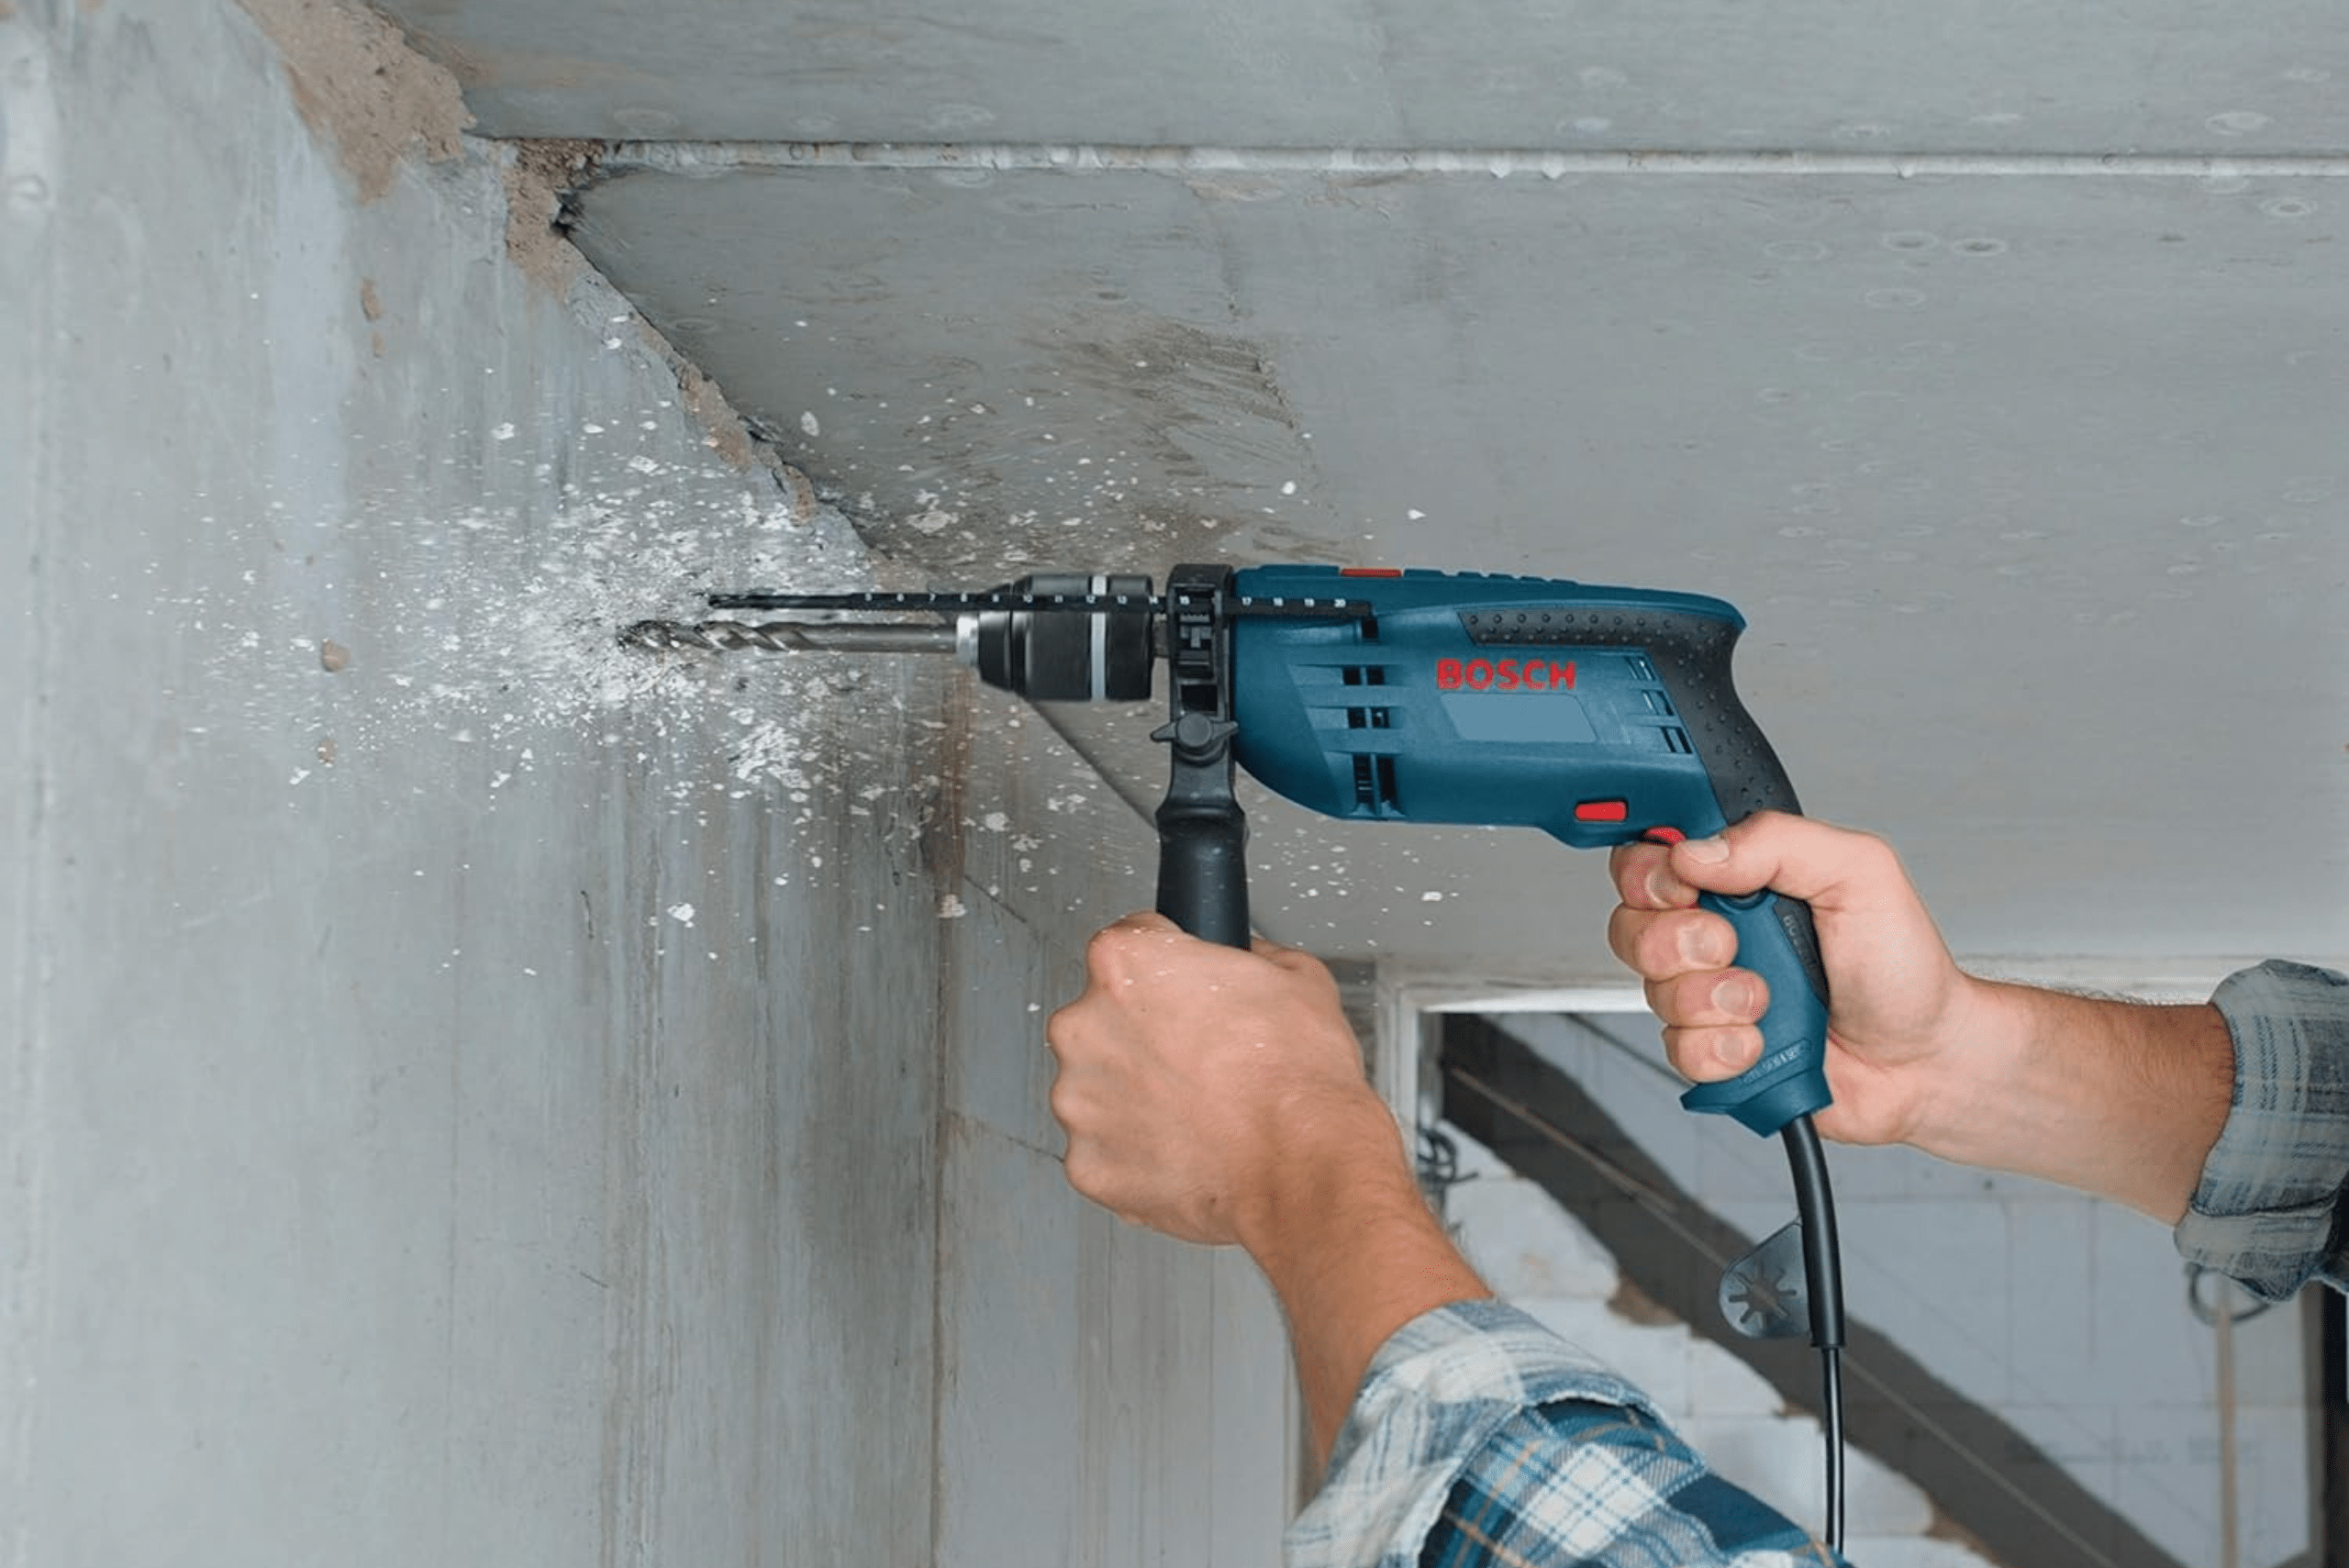 Person using hammer drill on concrete wall.